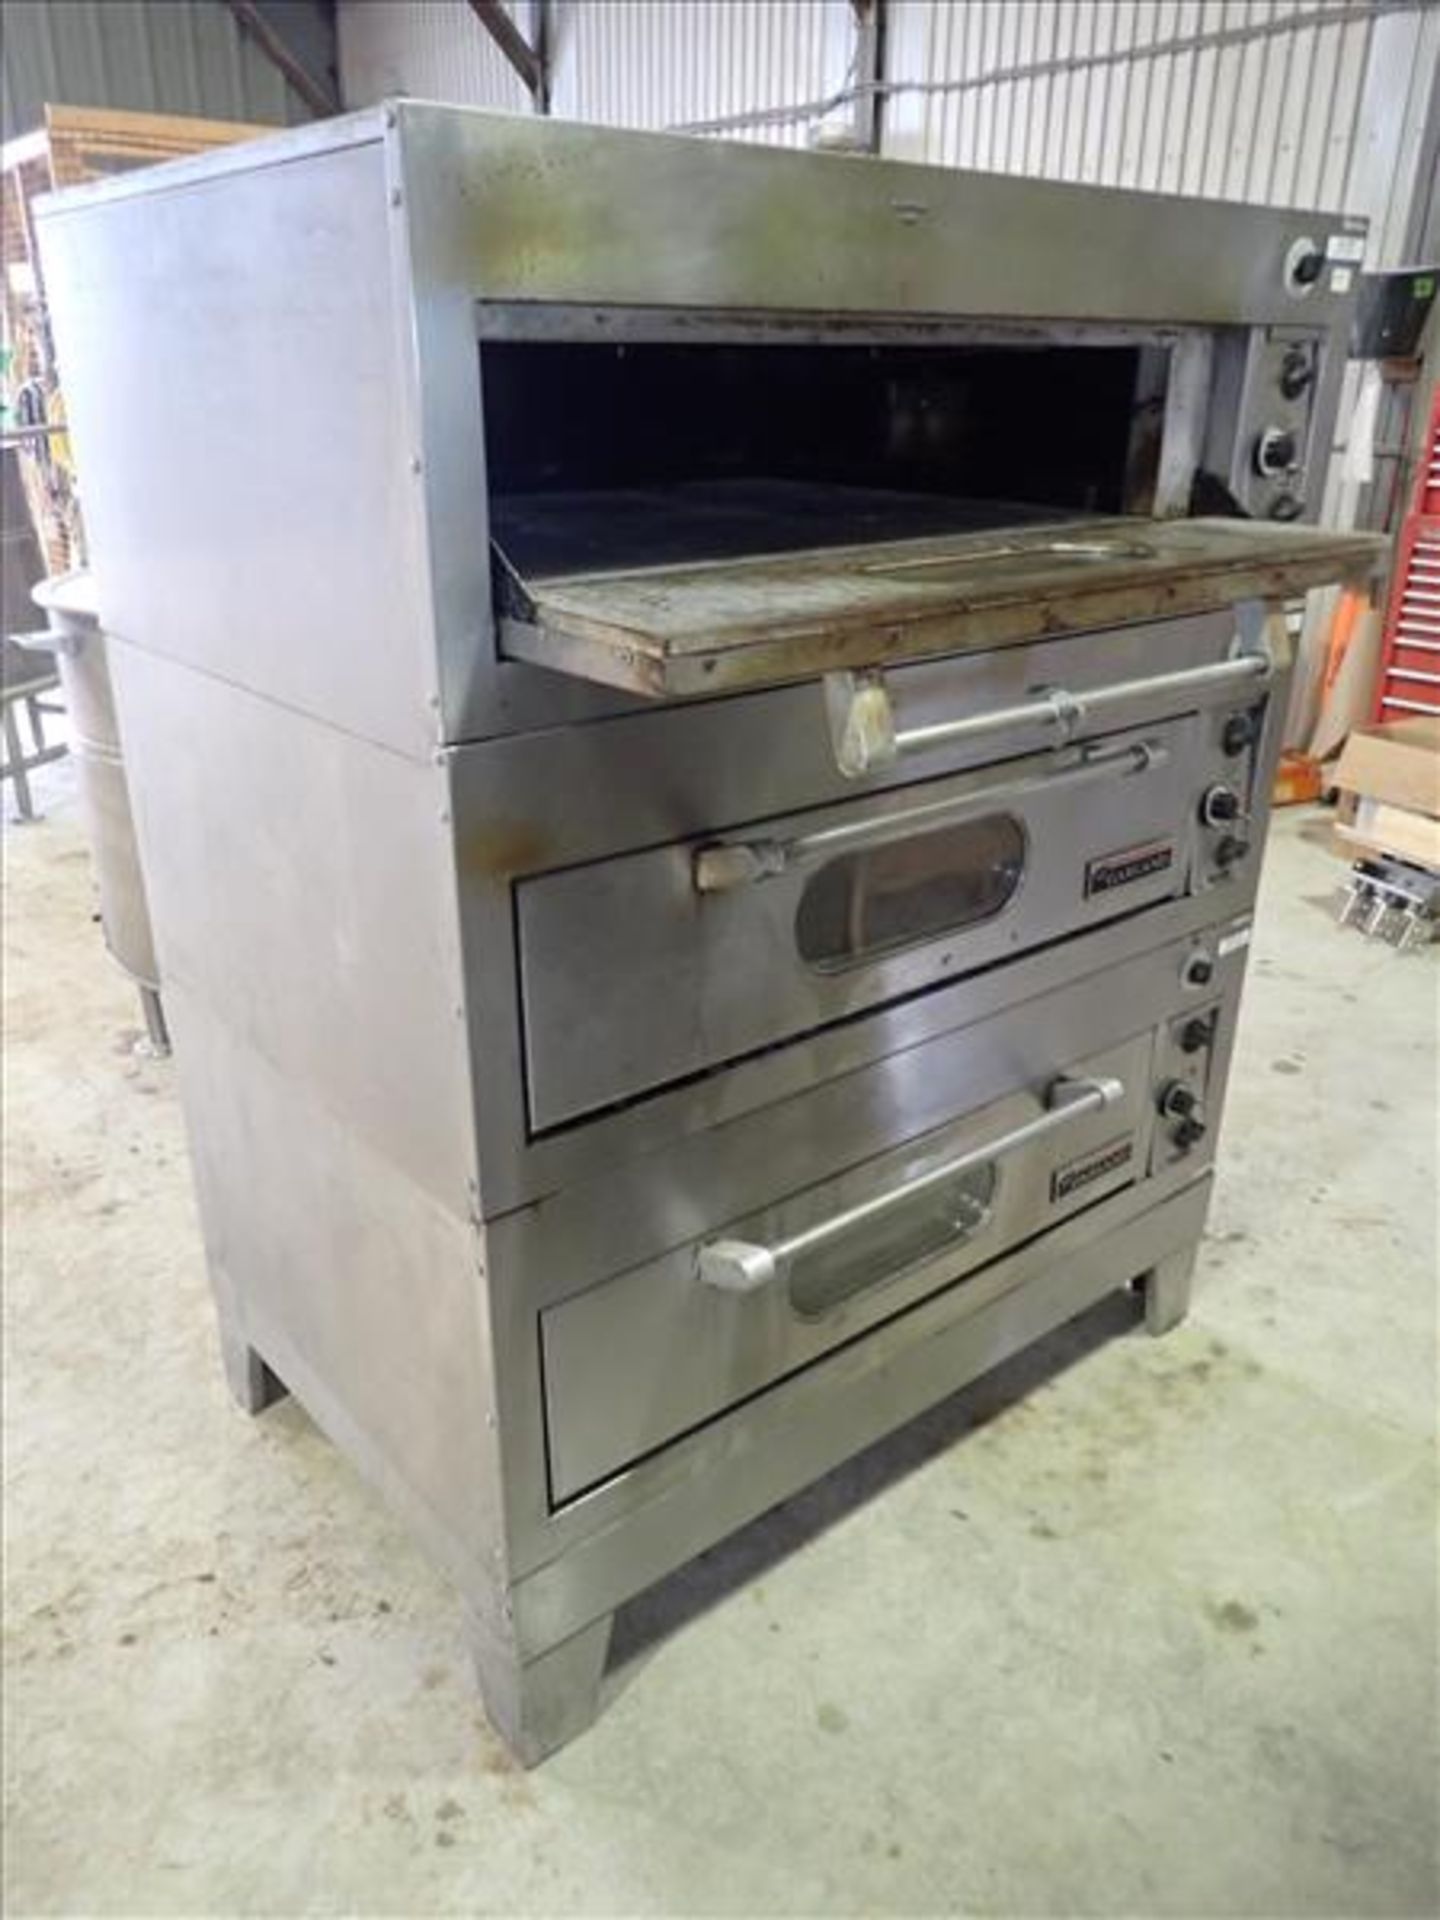 Garland Pizza Oven, 3-section, 42 in. (Tag No. 4437) [Sea Container 971037-8] {Location Hallnor} - Image 2 of 2